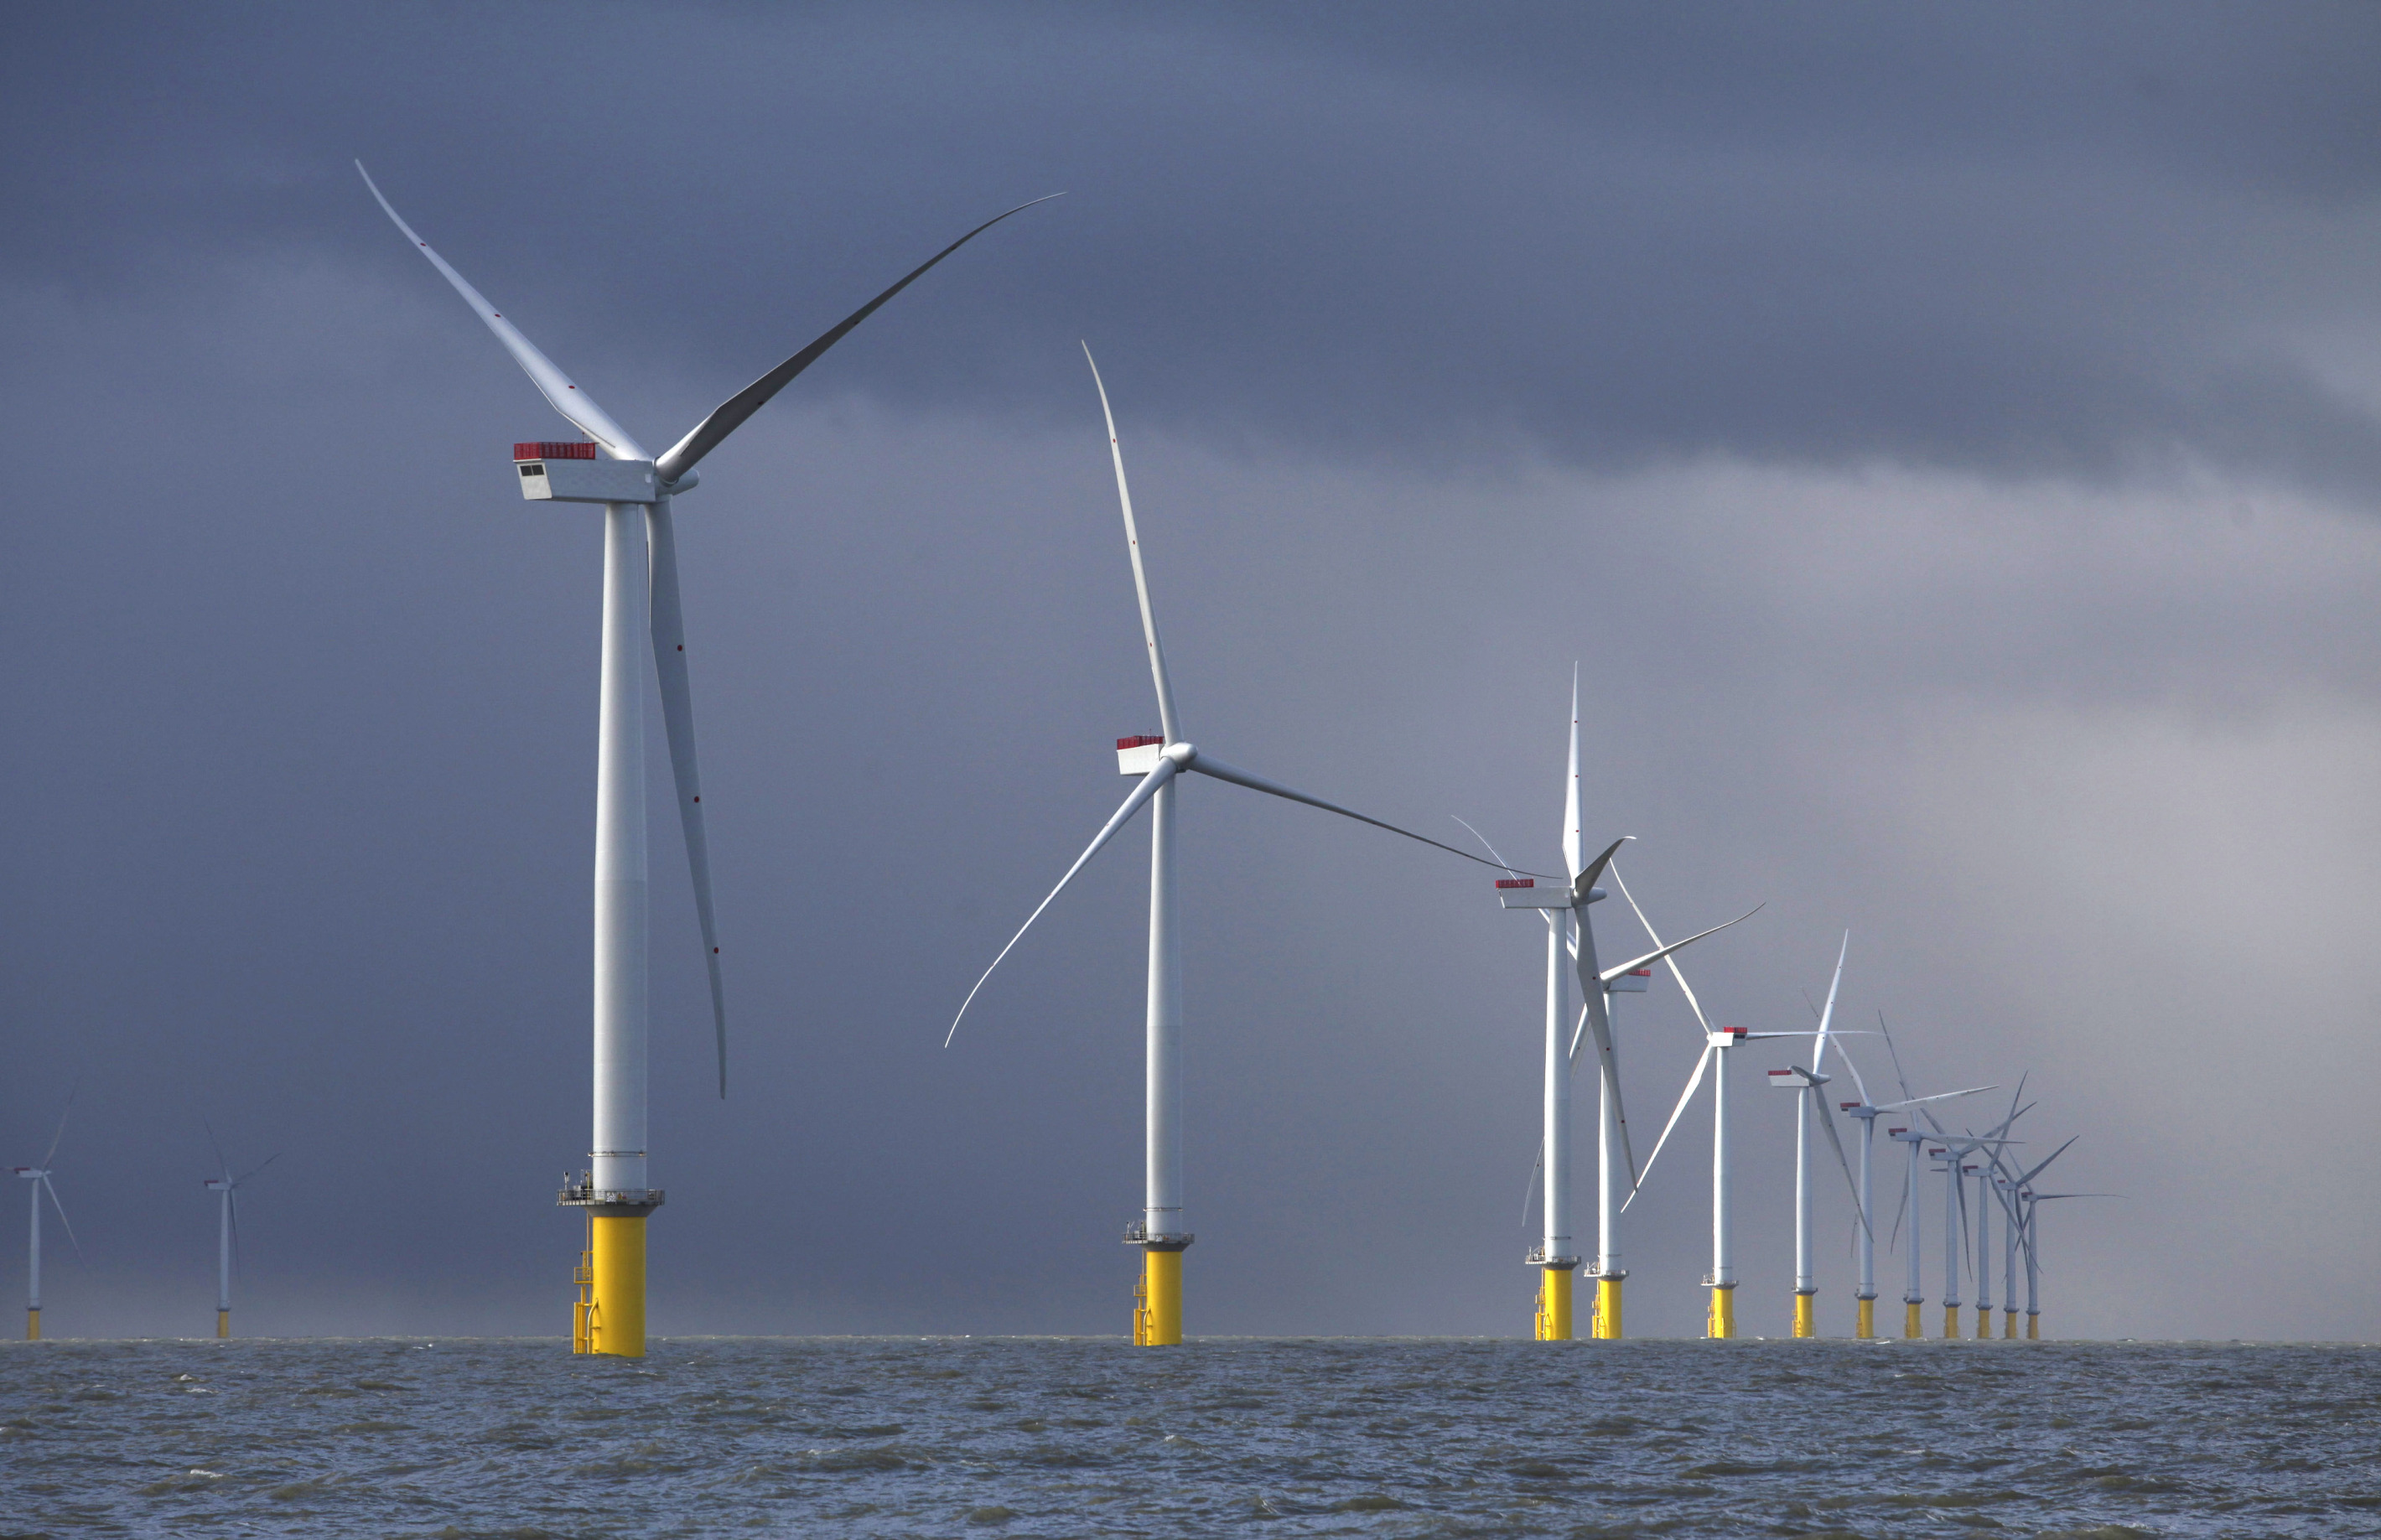 The World's Largest Wind Farm